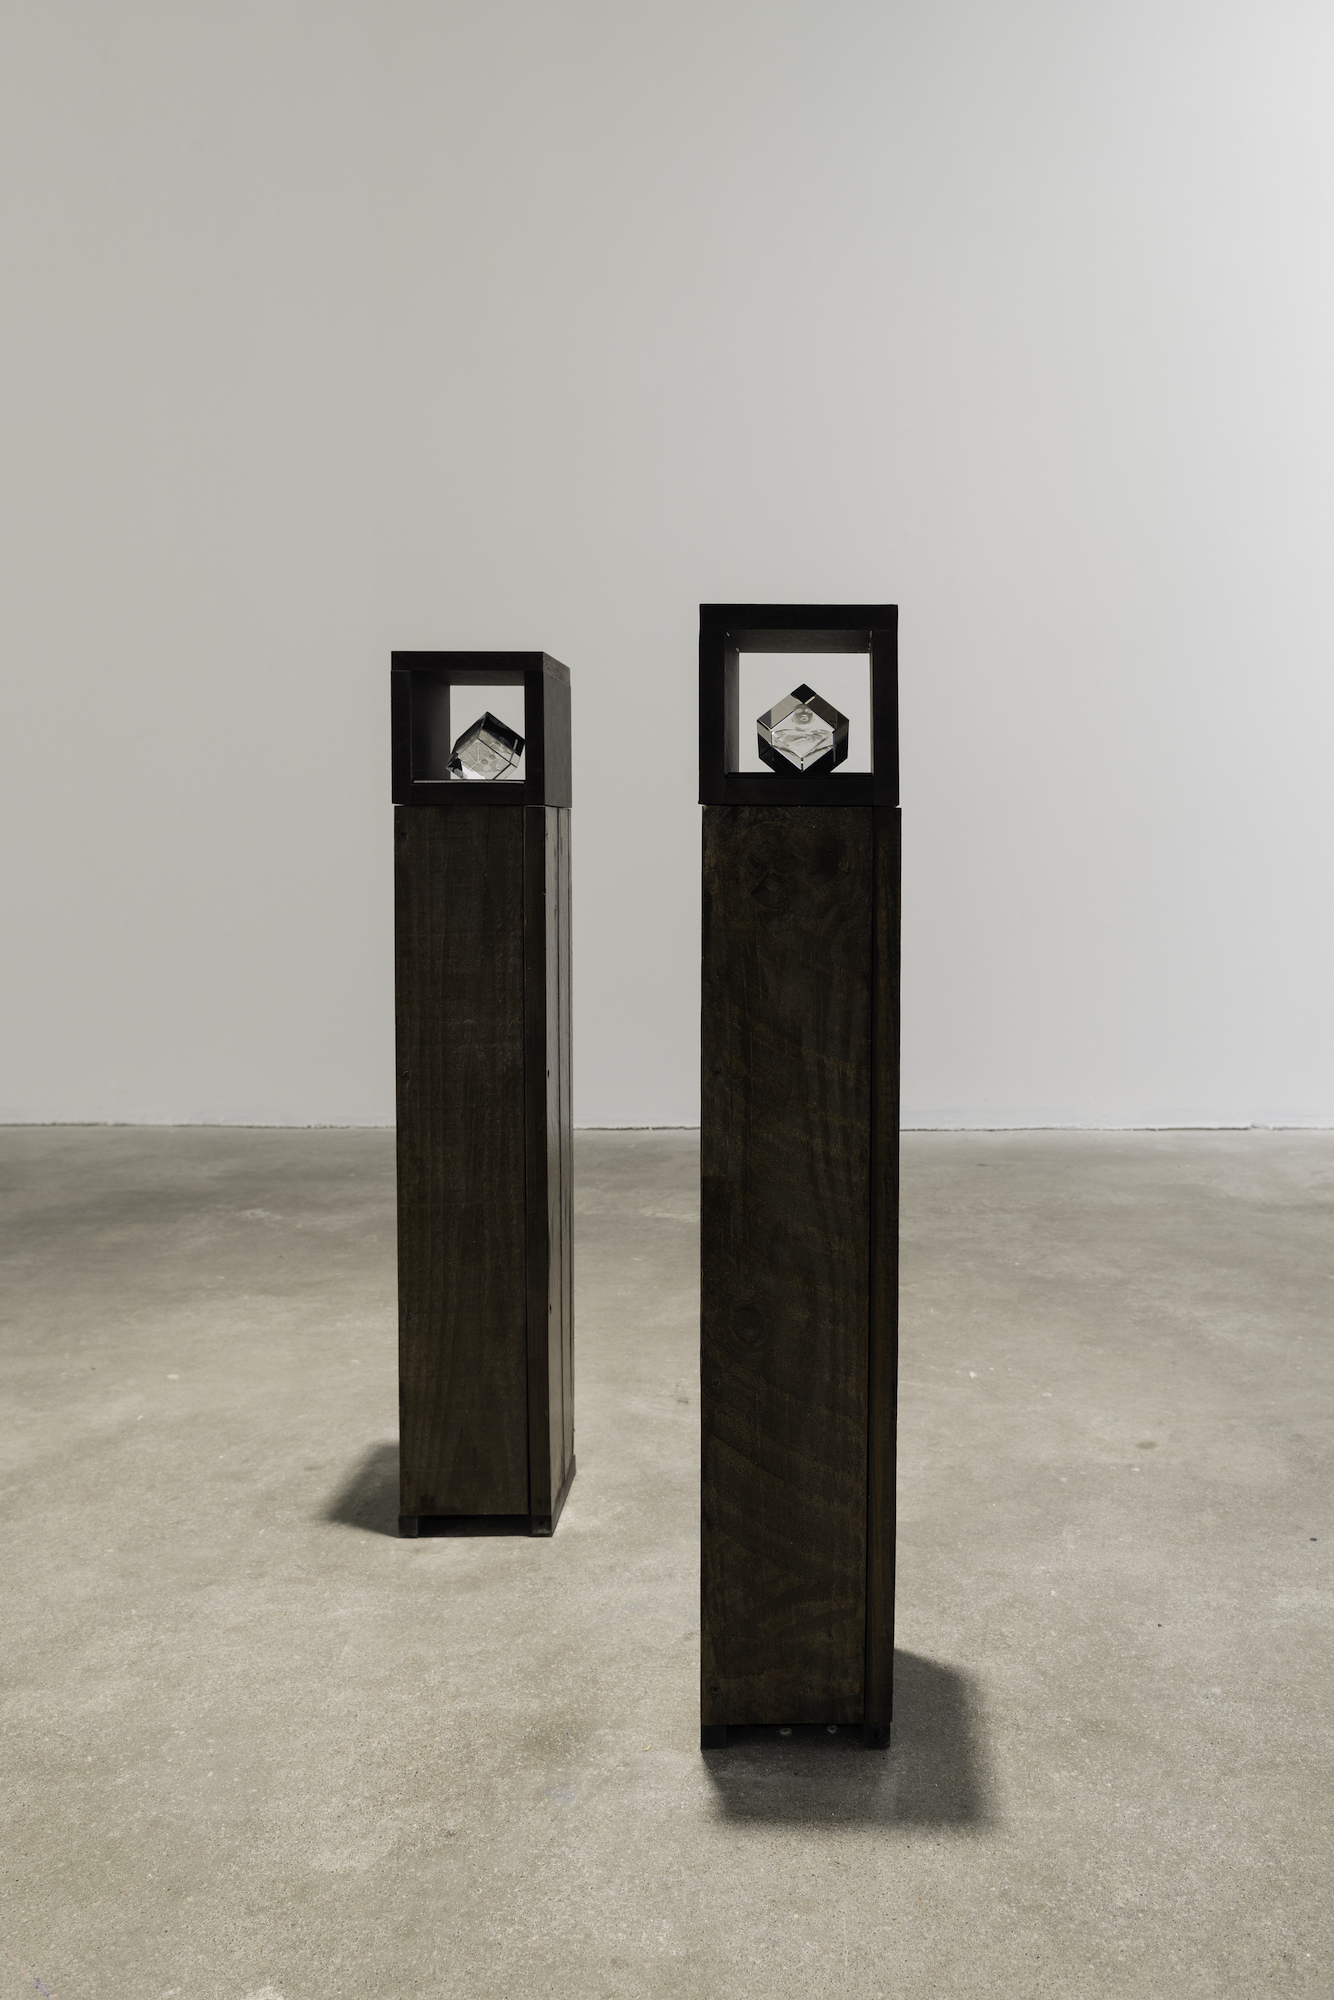 wo slim brown pedestal sculptures with side openings across each top, with small laser - cut glass sculptures nested inside